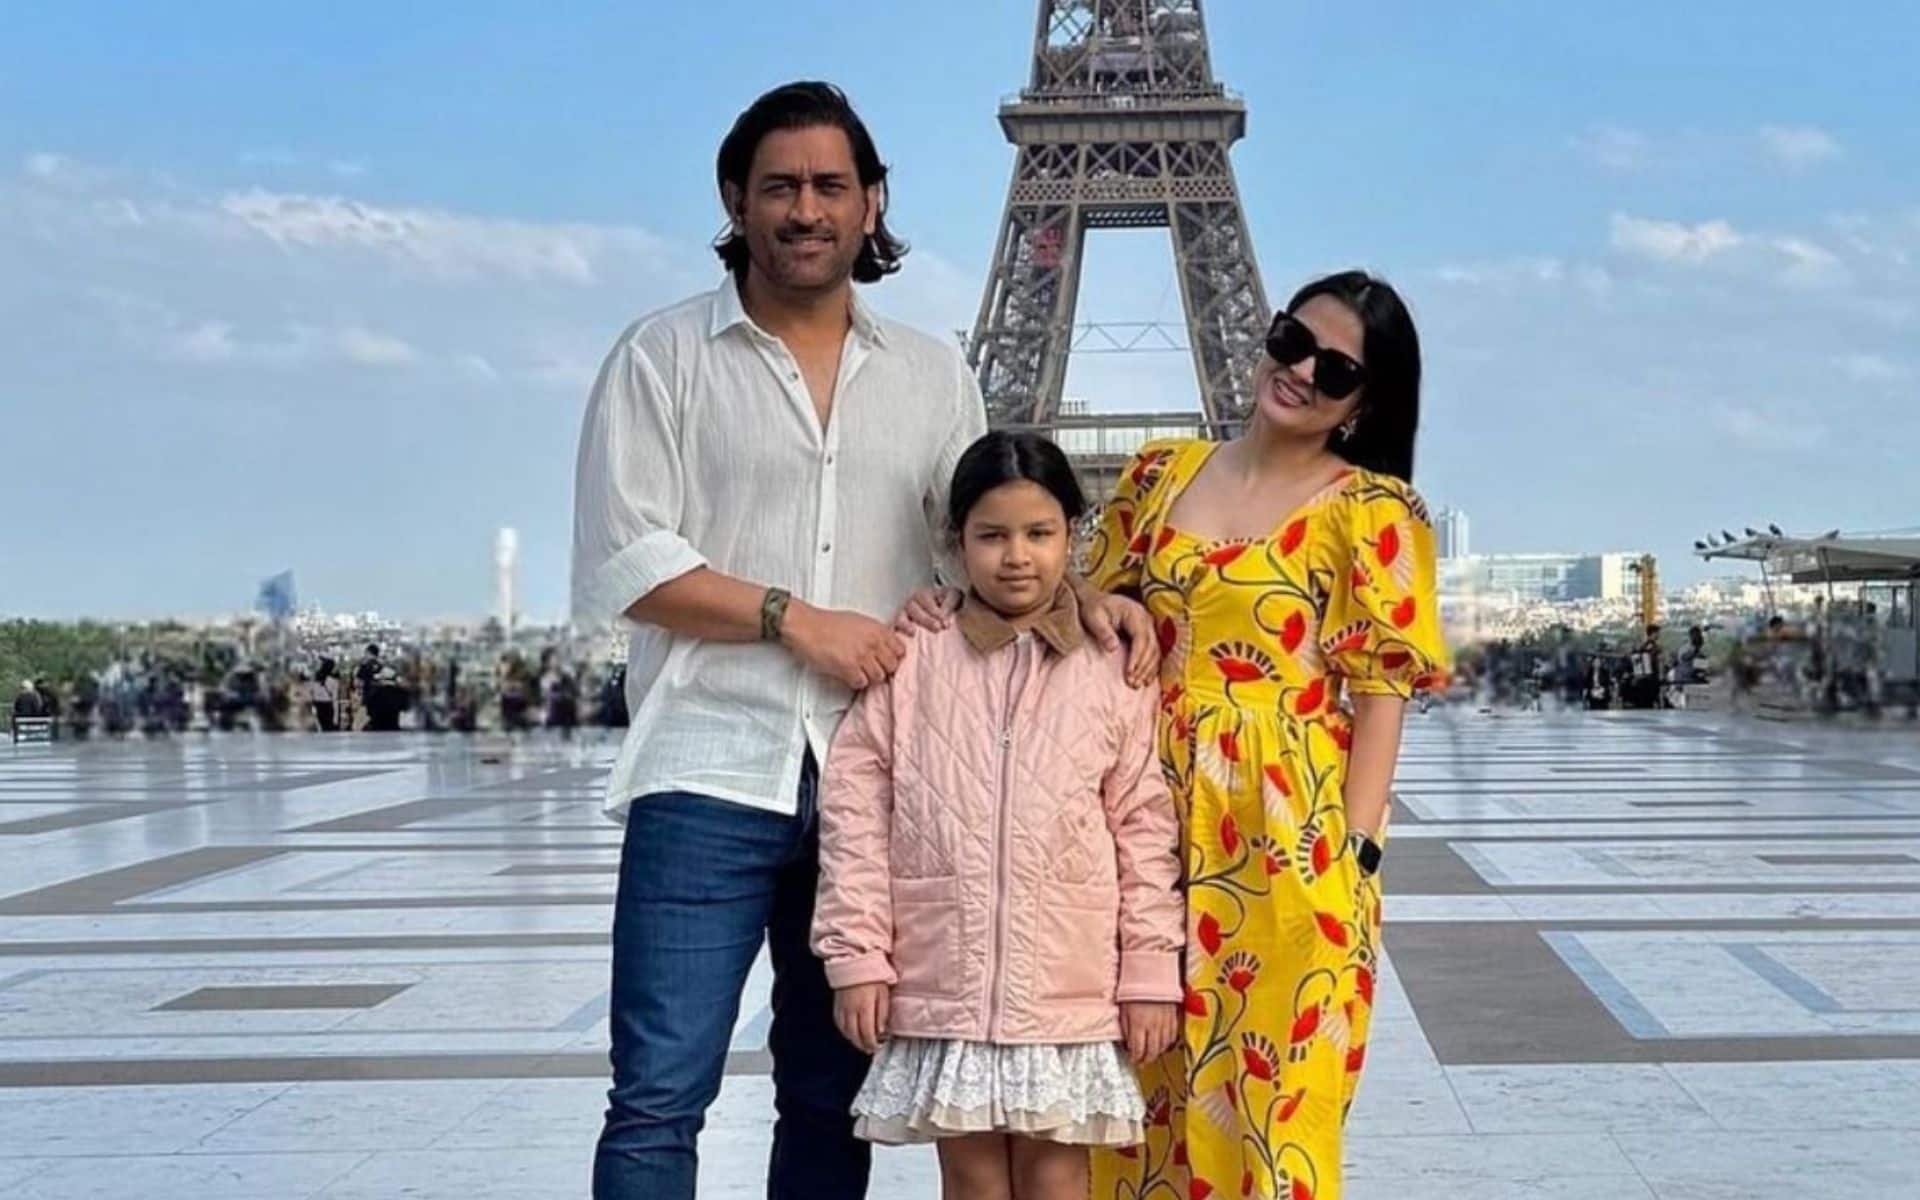 MS Dhoni wife his wife Sakshi and daughter Ziva in front of Eiffel Tower (x.com)